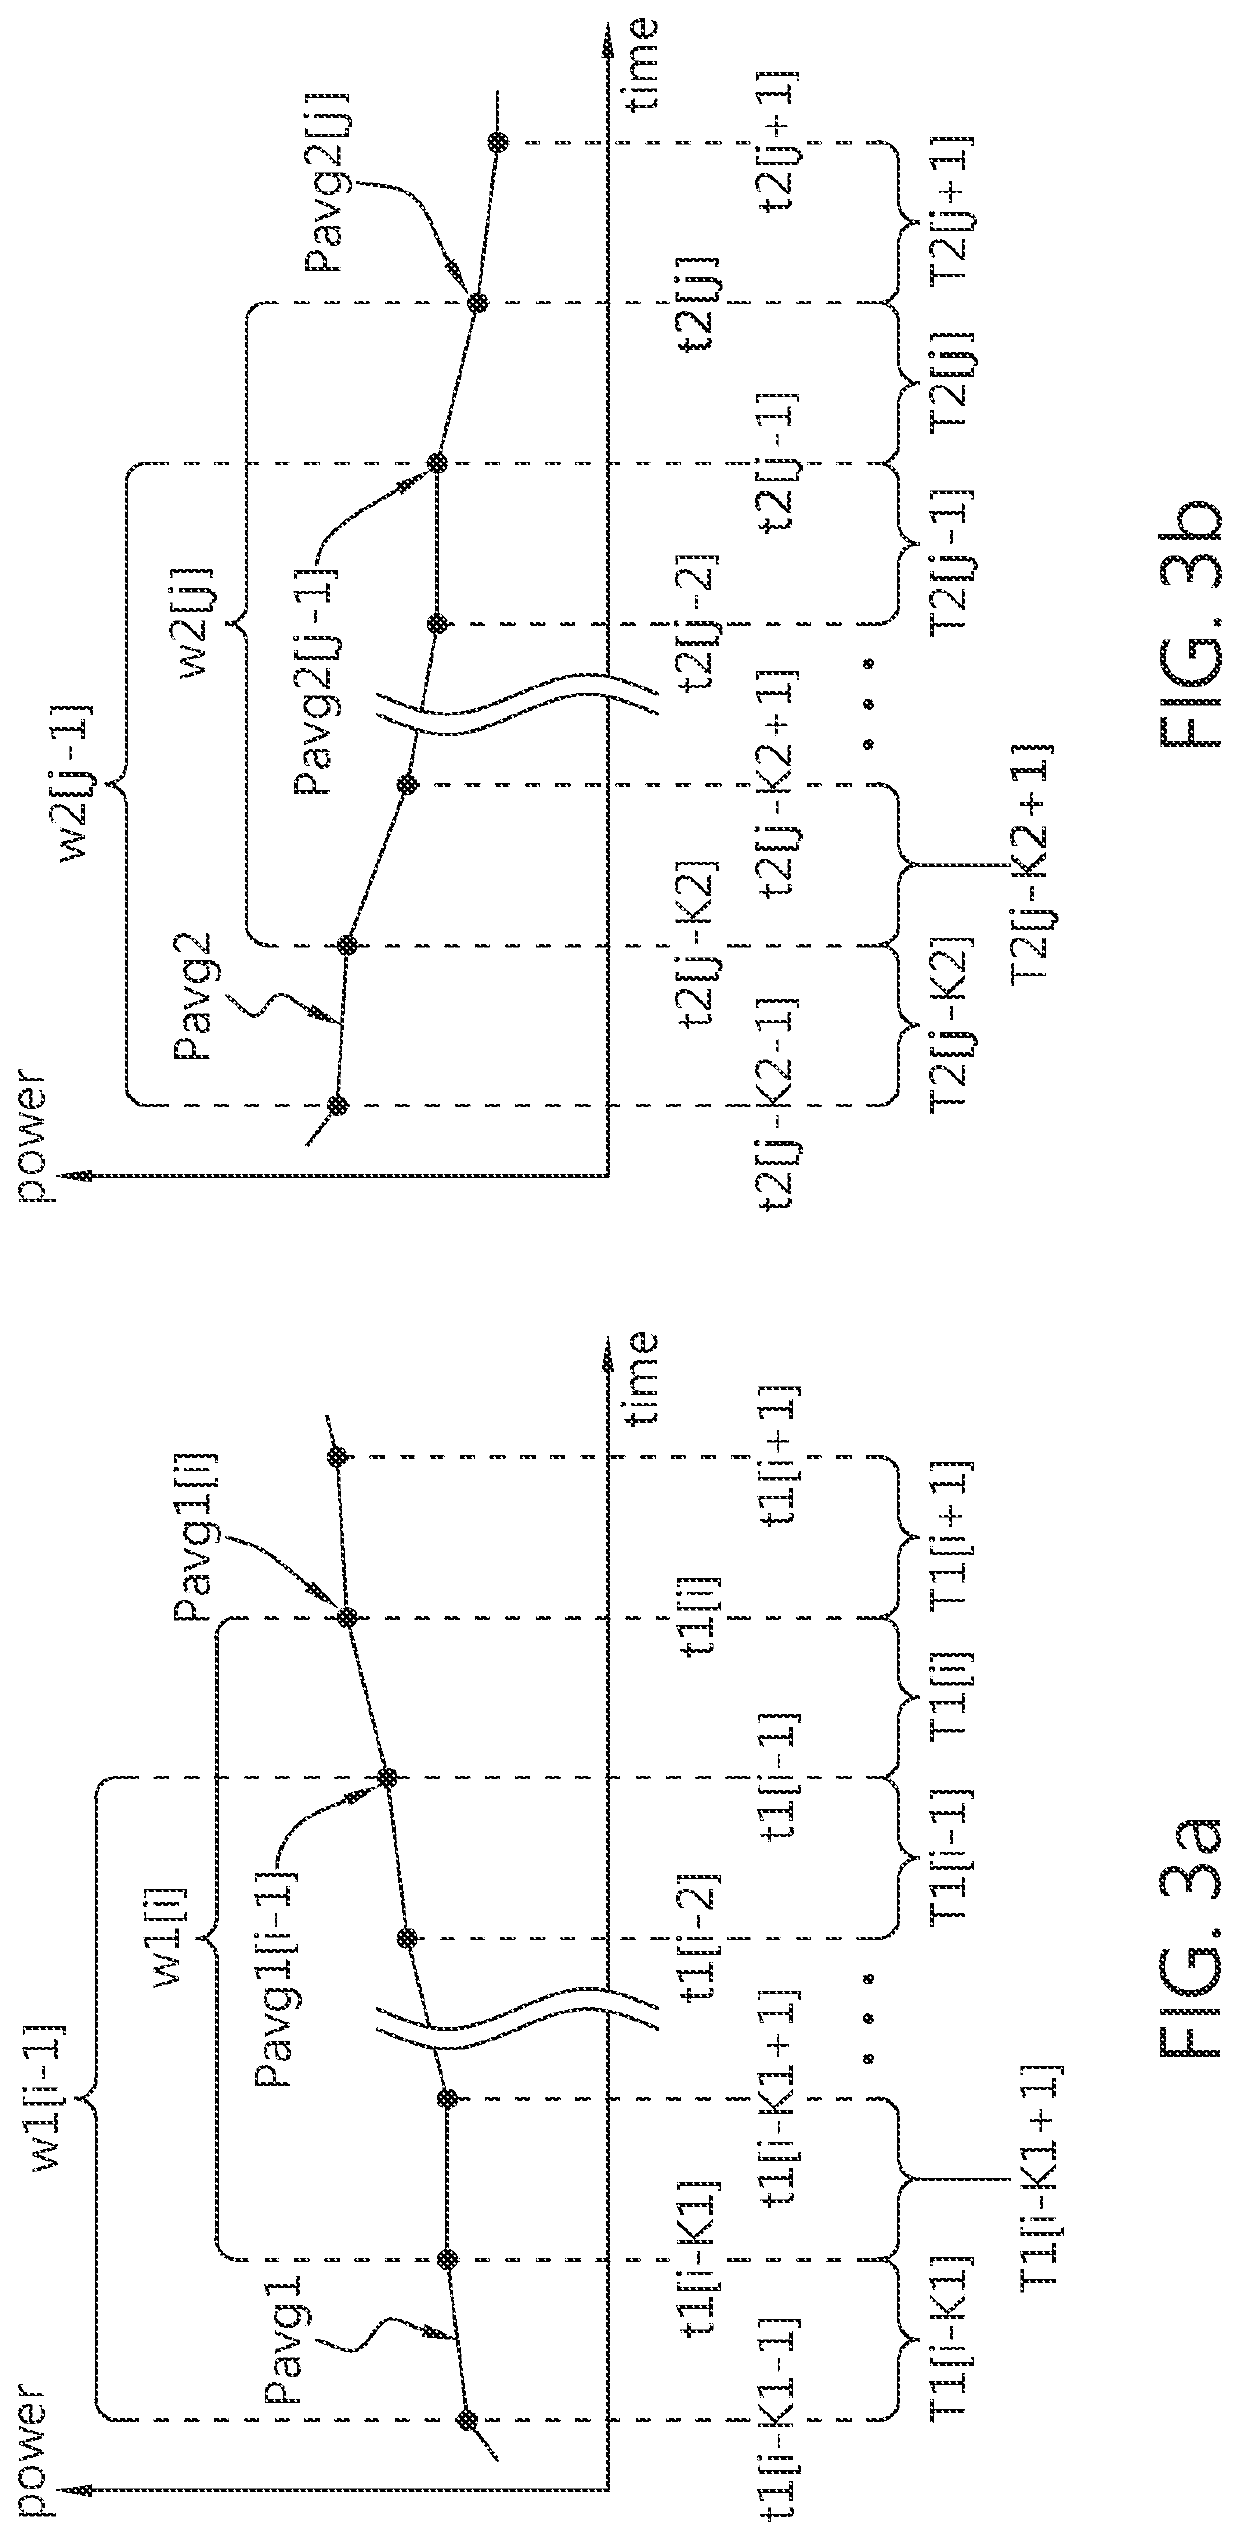 Method for improving transmission power management with compliance to regulations of radiofrequency exposure